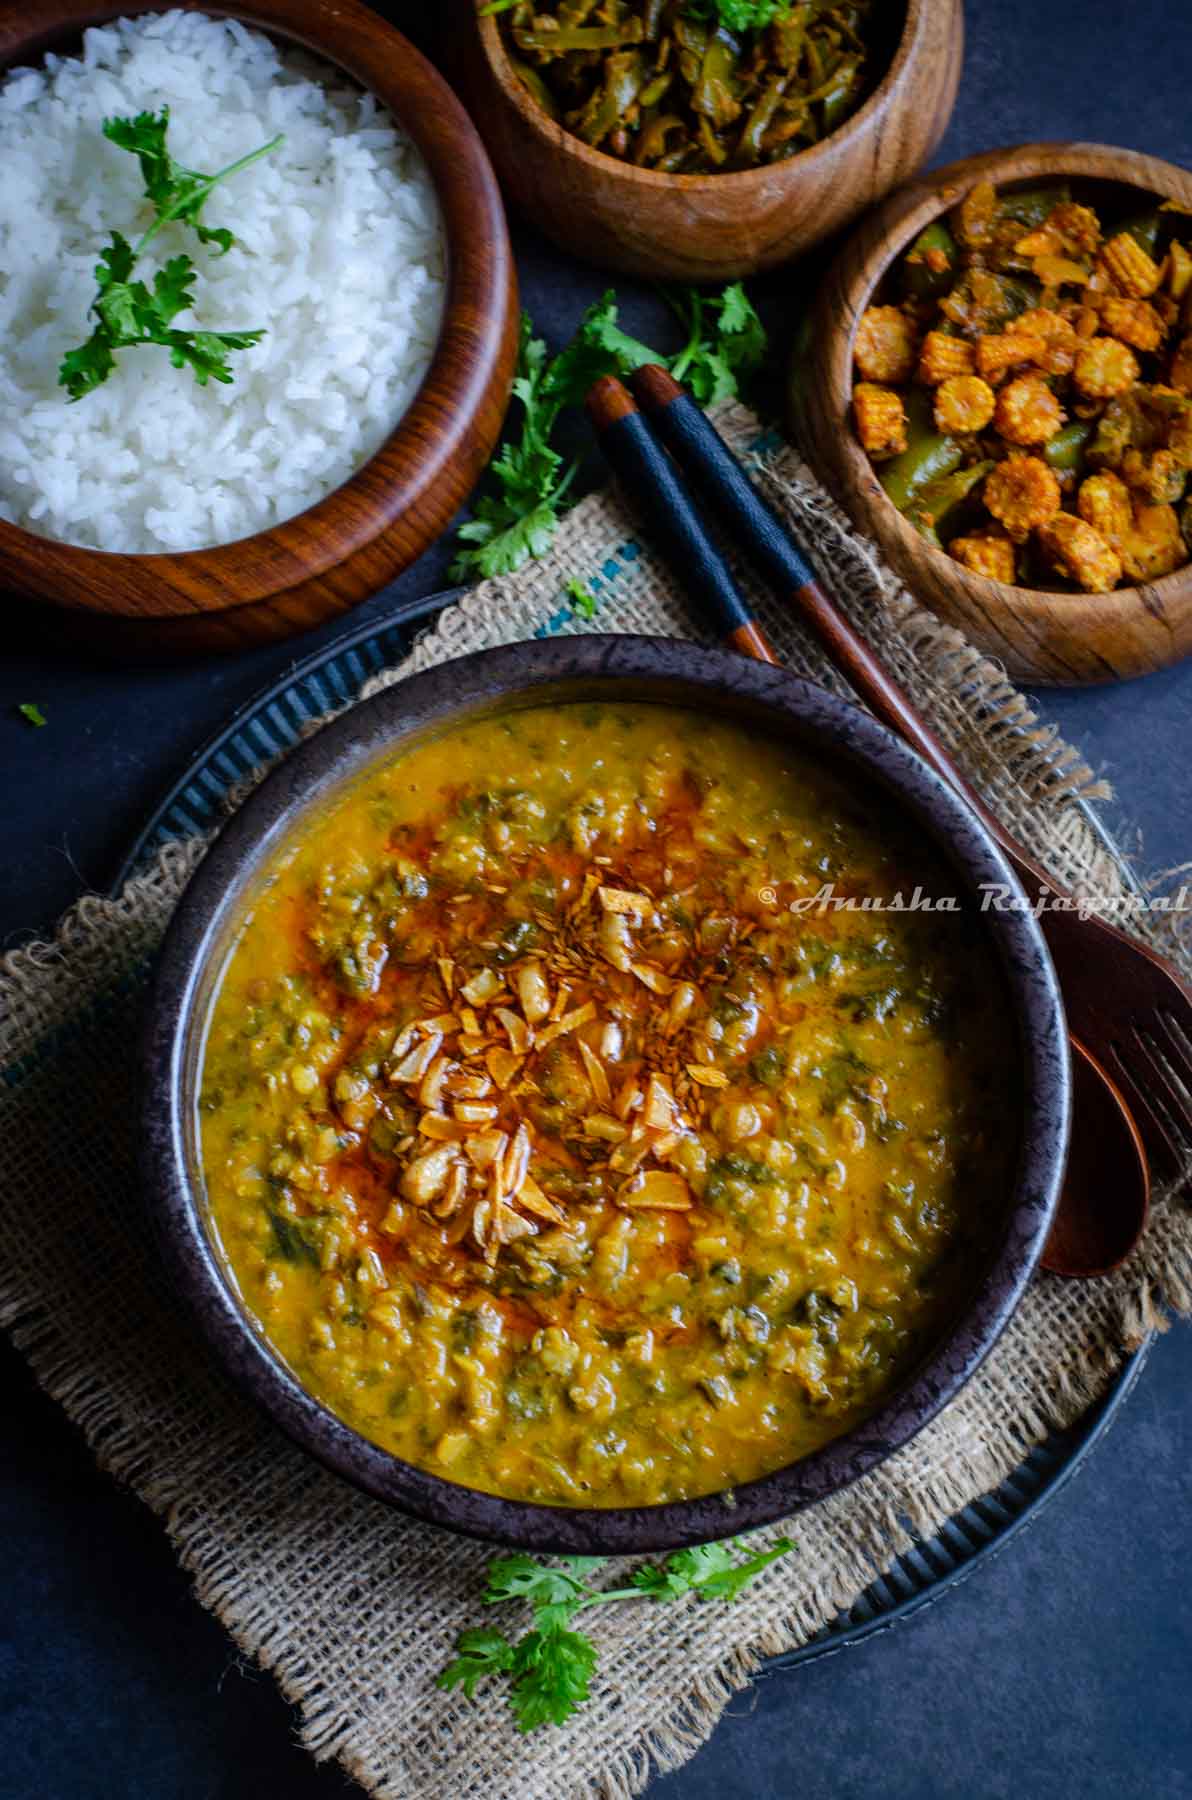 Kale dal served with a tempering of fried garlic and red paprika on top. The bowl of dal is placed over a burlap map. Rice and veggies served in wooden bowls by the side.